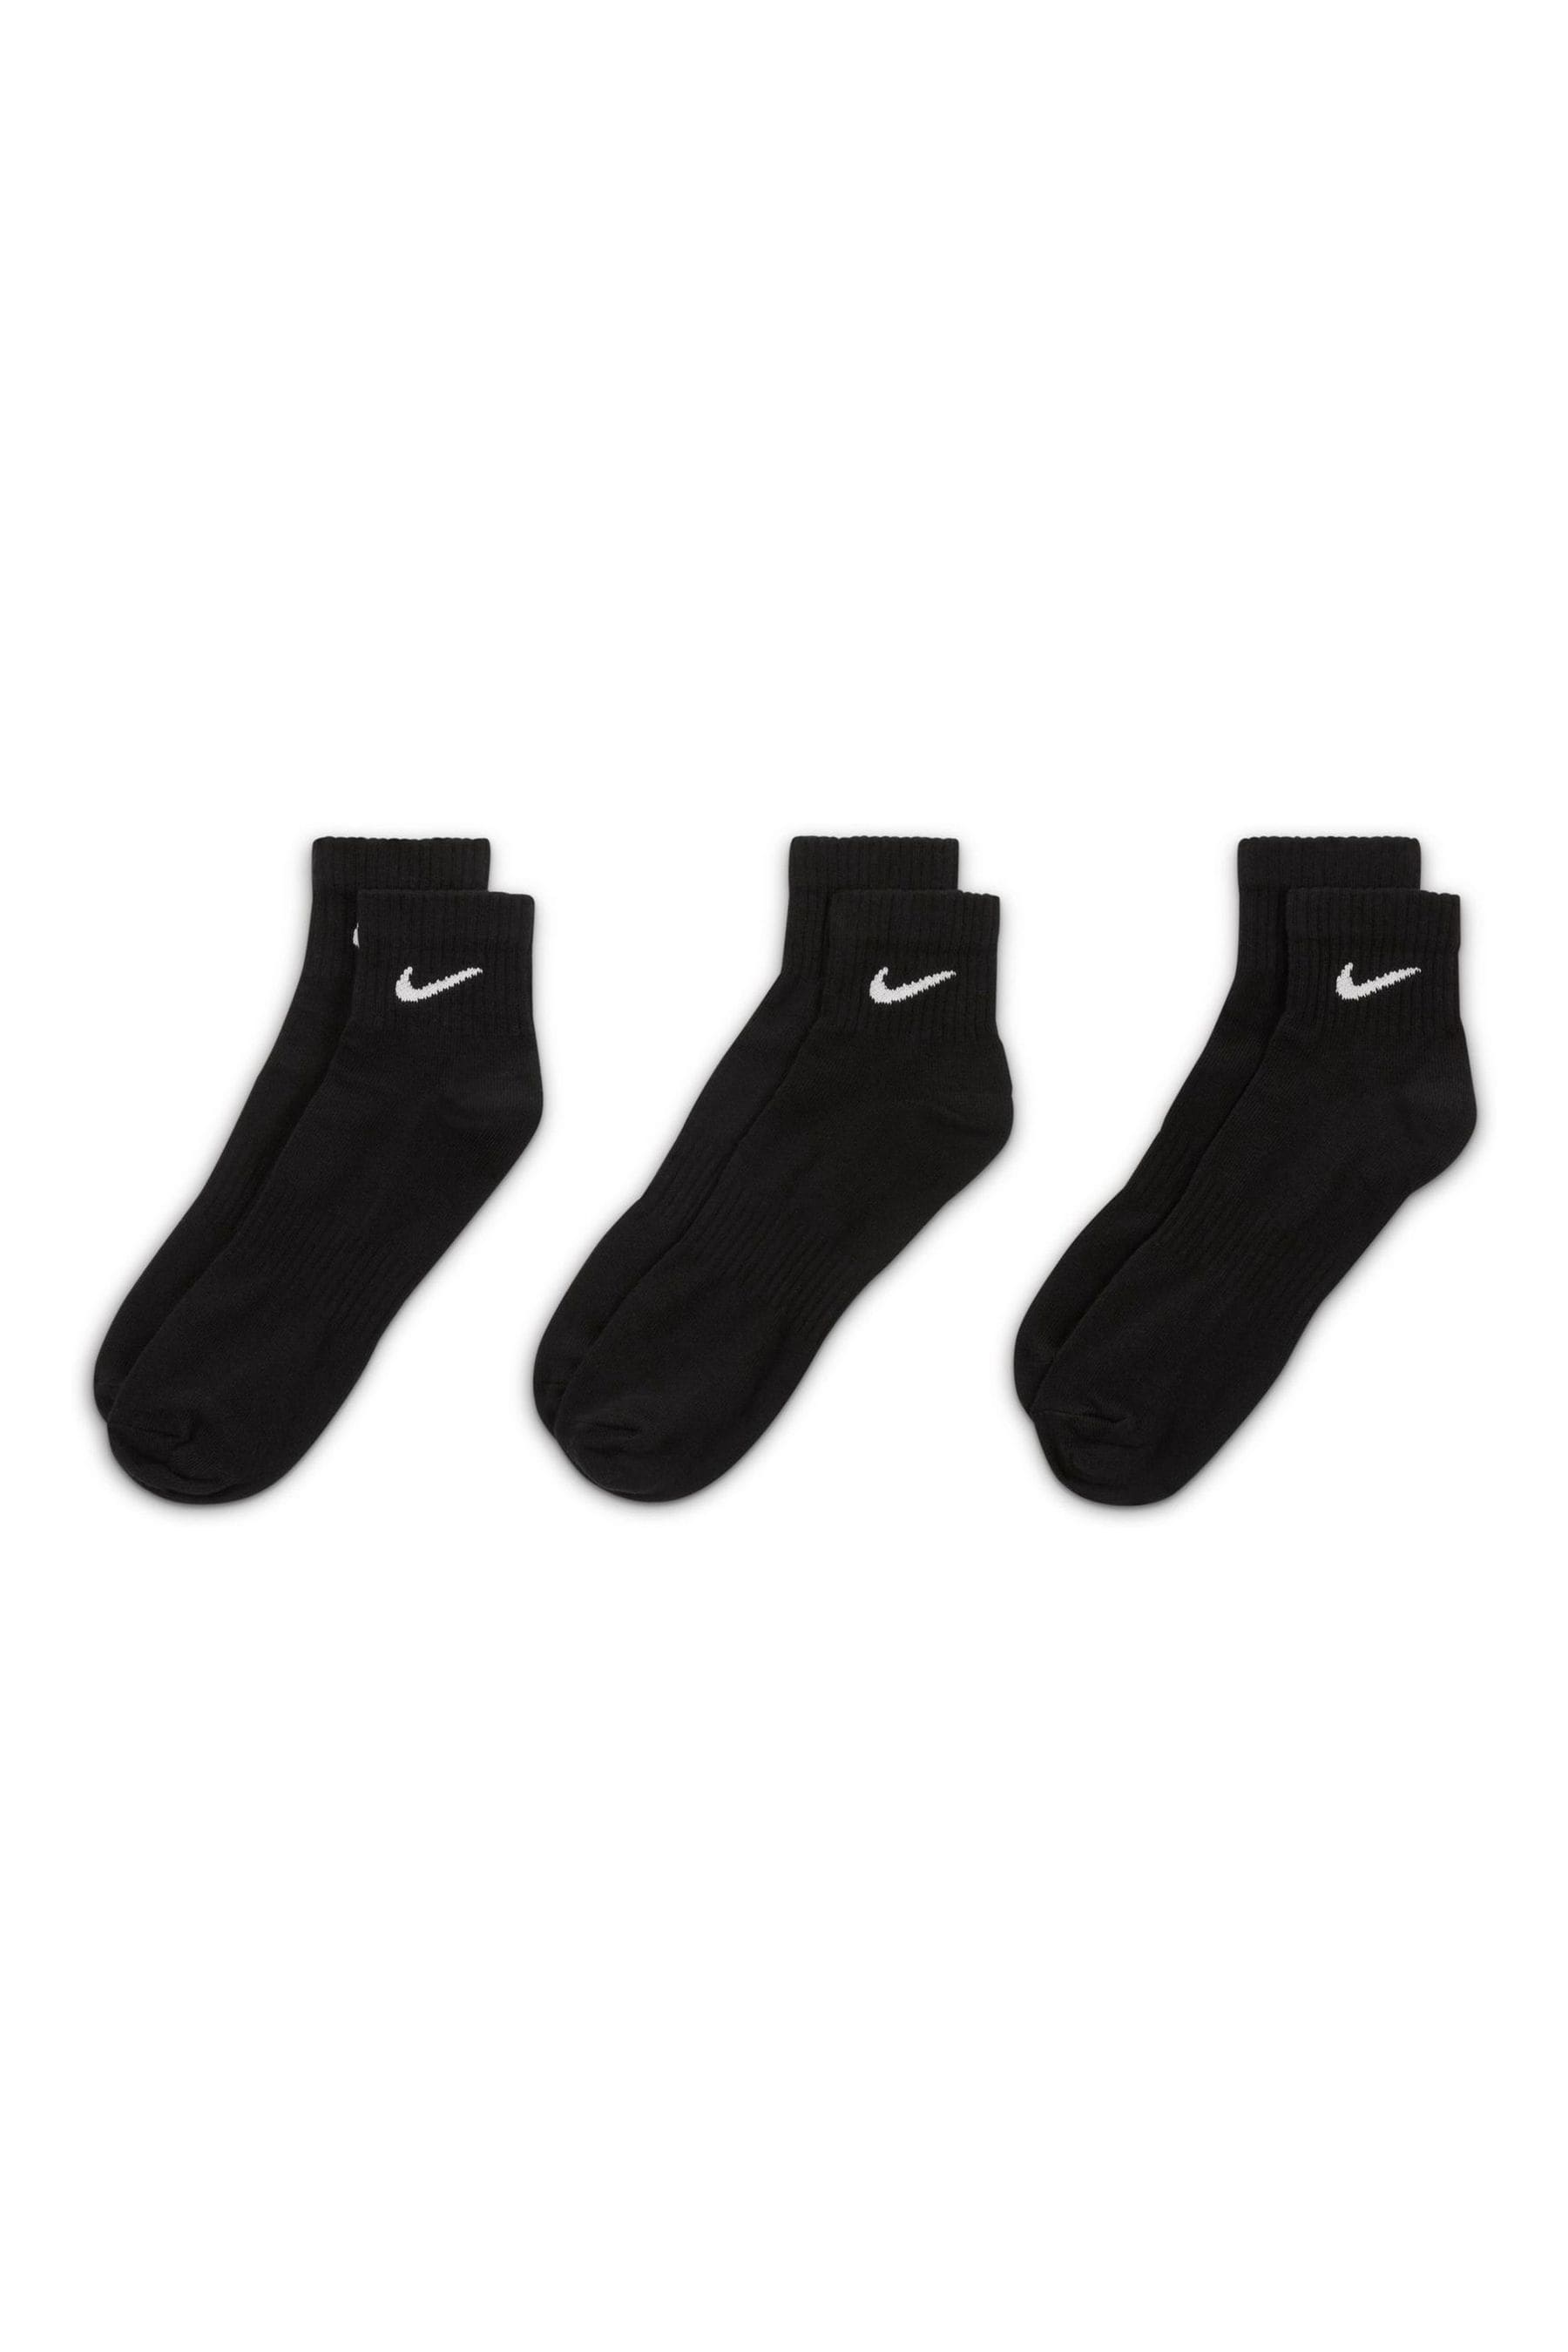 Buy Nike Black Lightweight Everyday Ankle Socks 3 Pack from the Next UK ...